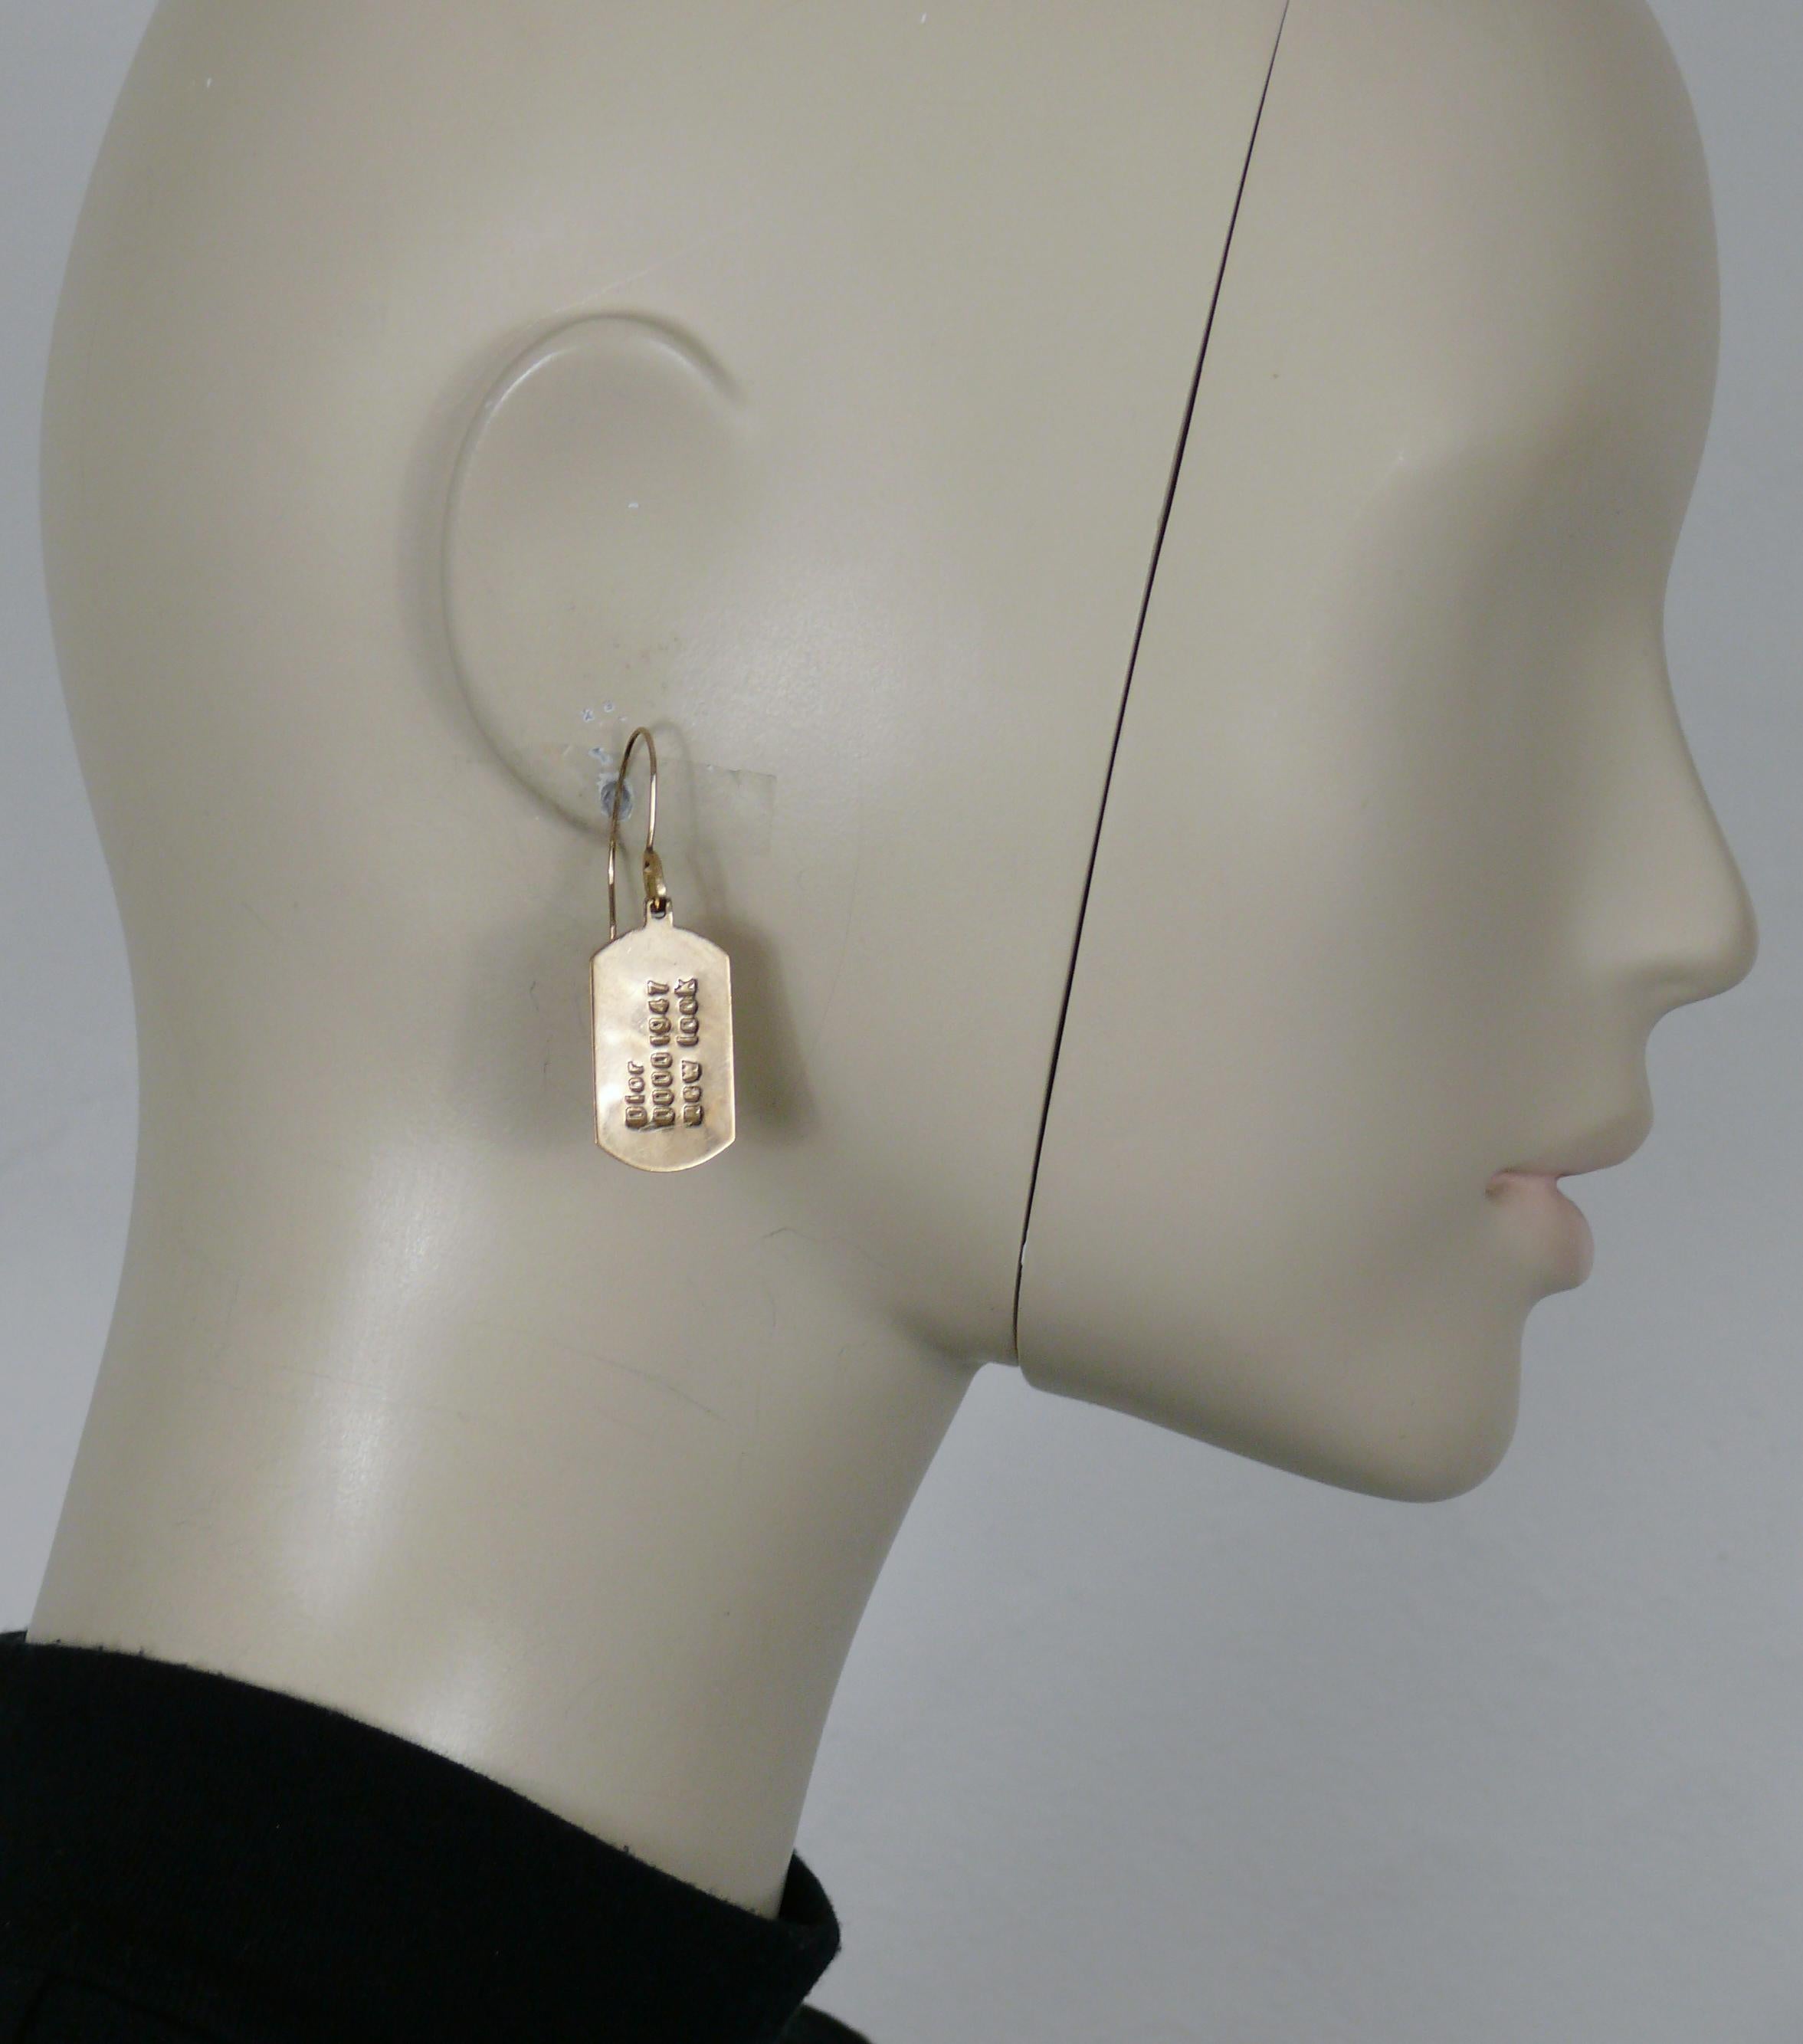 CHRISTIAN DIOR by JOHN GALLIANO vintage gold tone stud dangle earrings featuring a rectangular ID tag embossed 